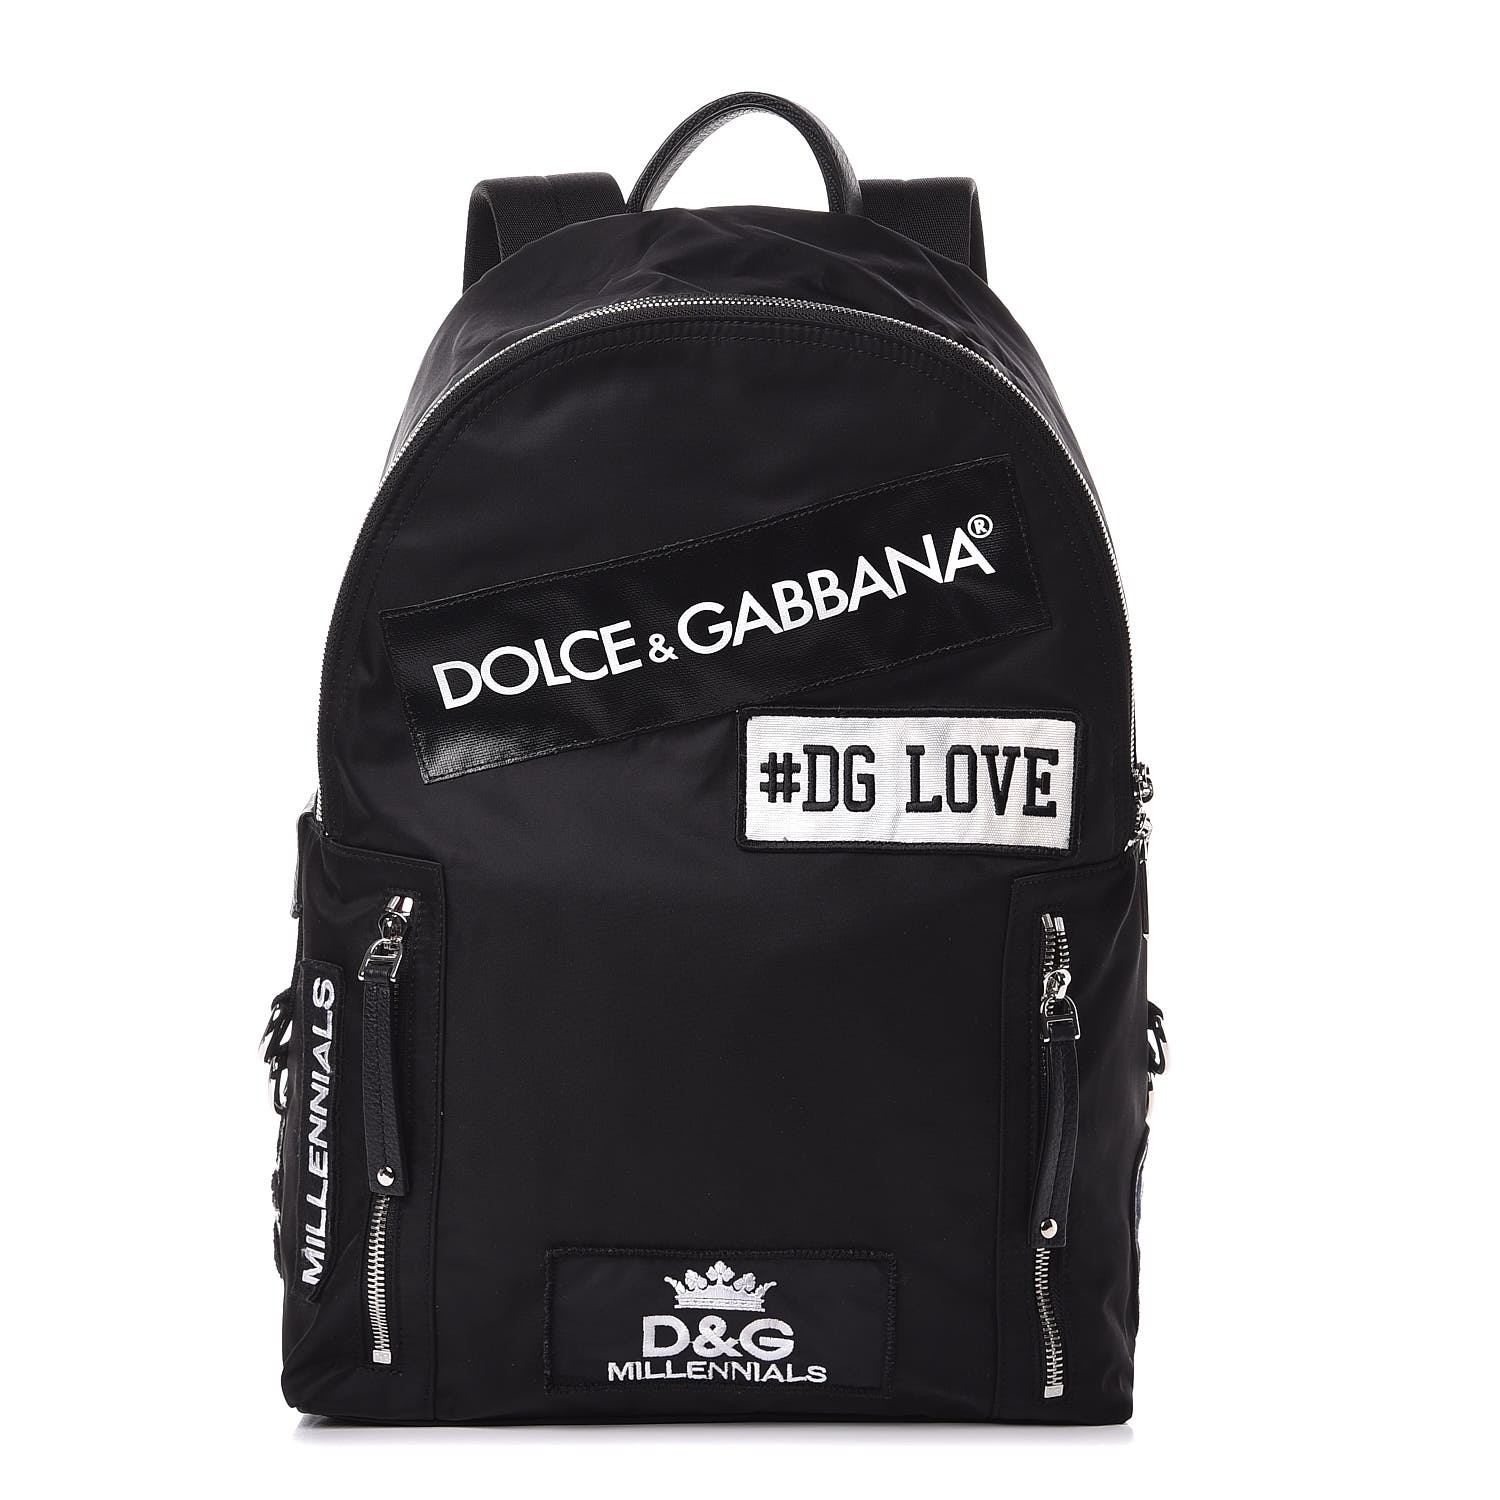 dolce and gabbana backpack